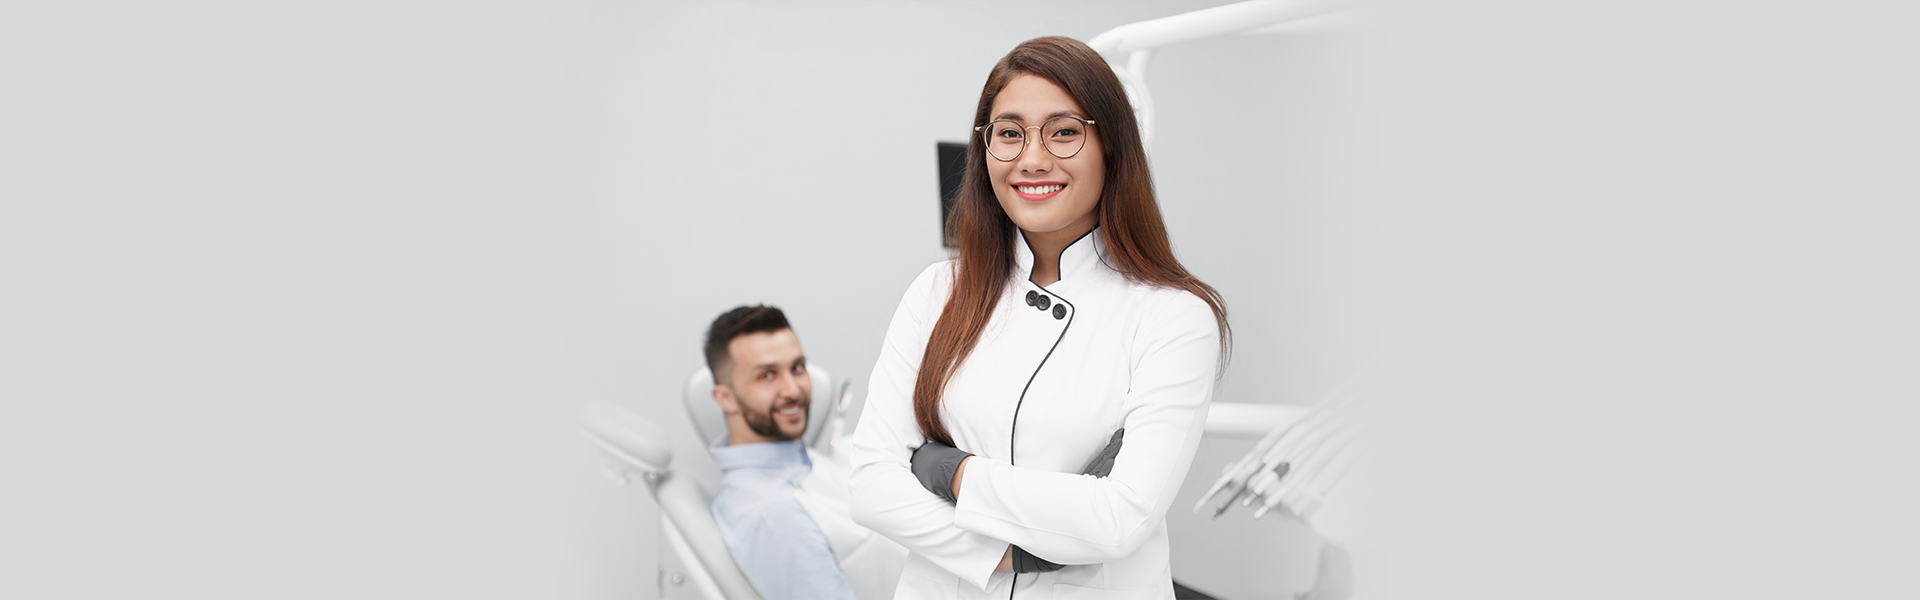 July 29th Seminar Topic #27: How to Choose a Dental office